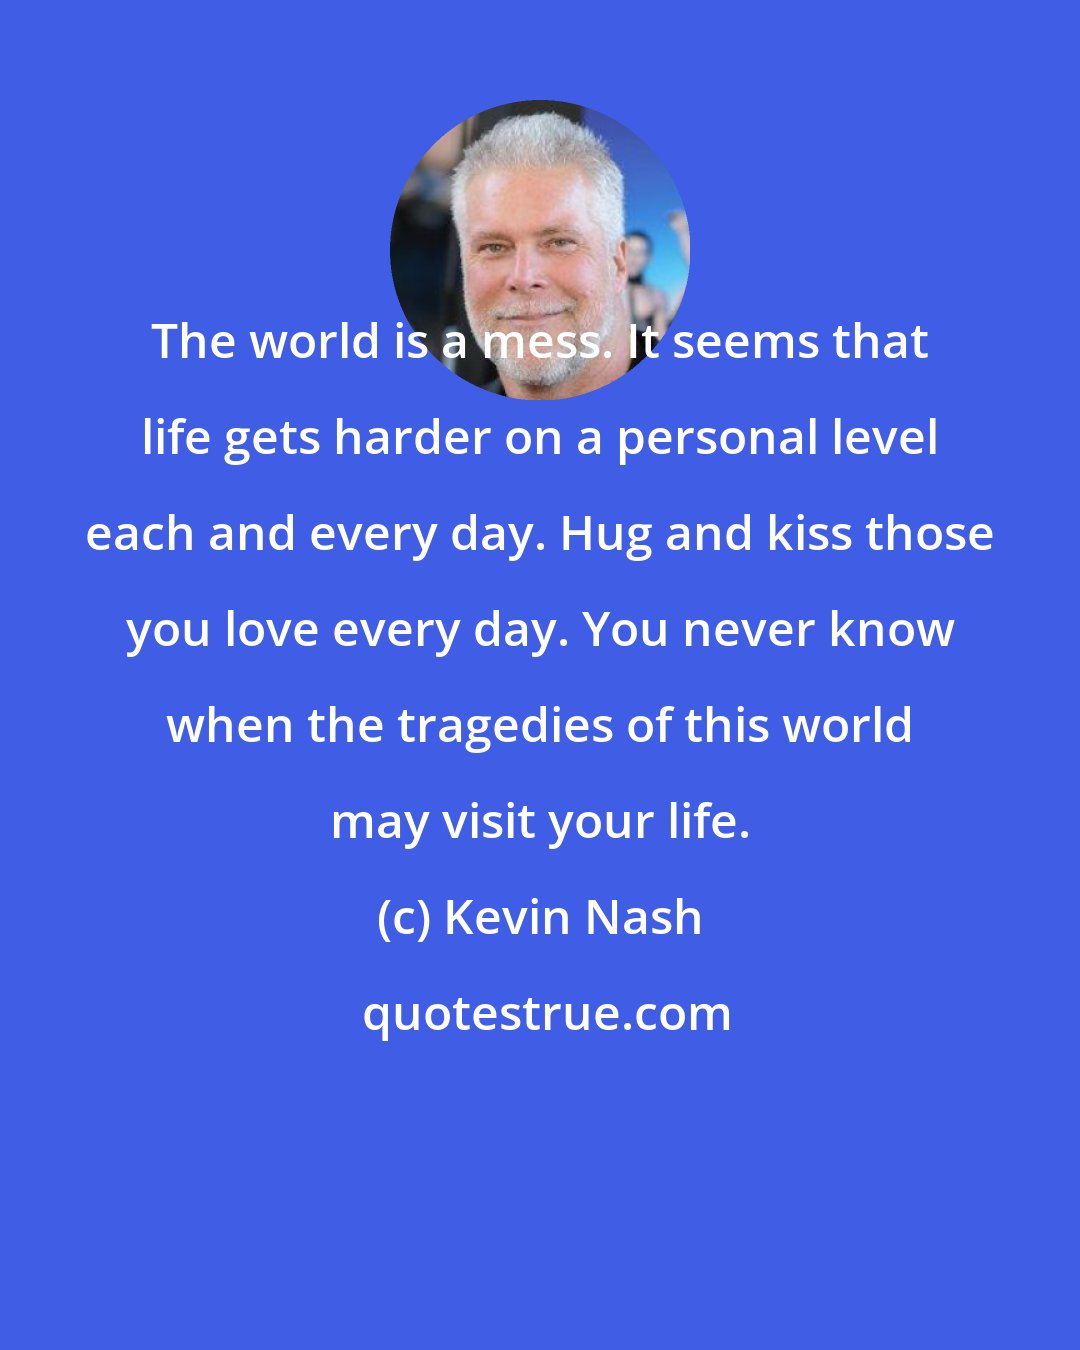 Kevin Nash: The world is a mess. It seems that life gets harder on a personal level each and every day. Hug and kiss those you love every day. You never know when the tragedies of this world may visit your life.